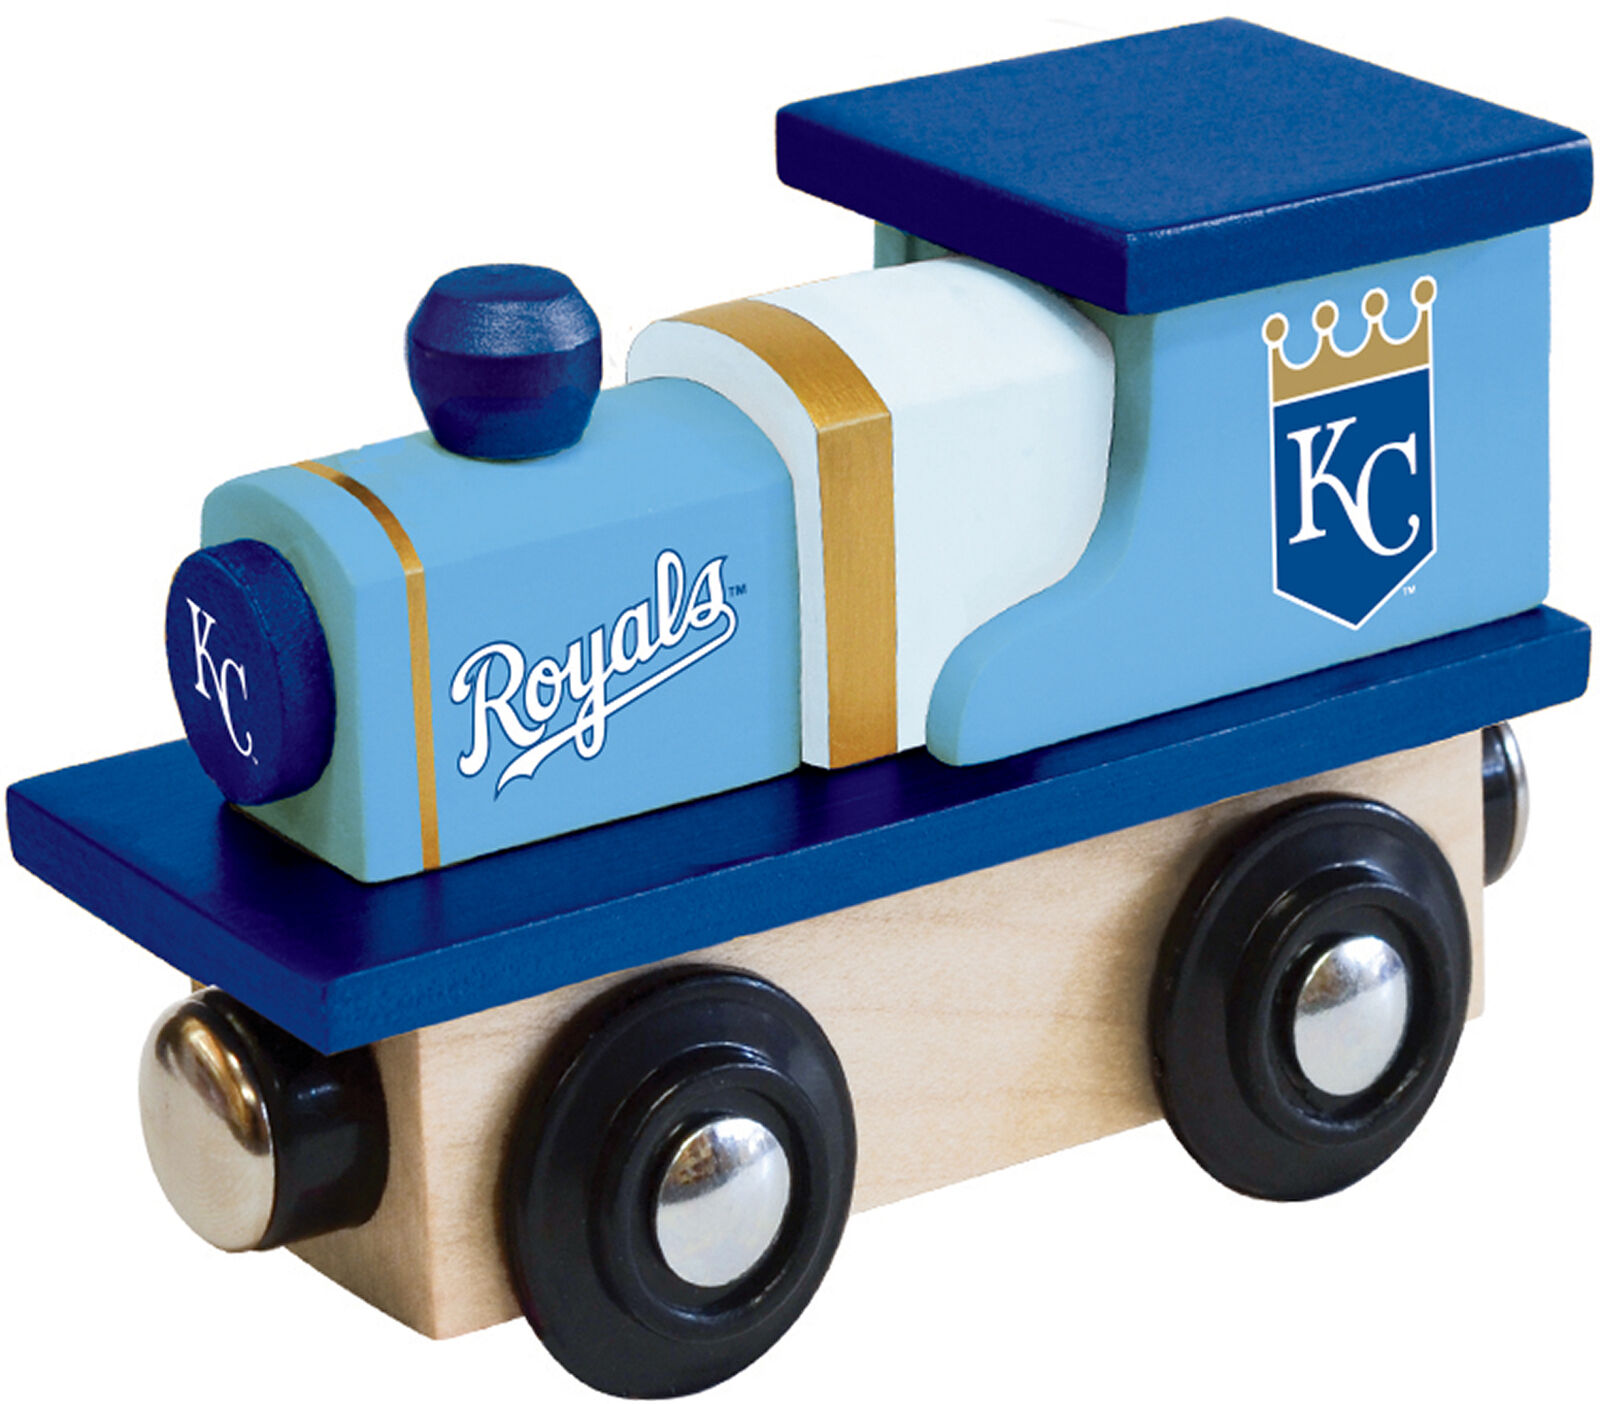 Officially Licensed MLB Kansas City Royals Wooden Toy Train Engine For Kids